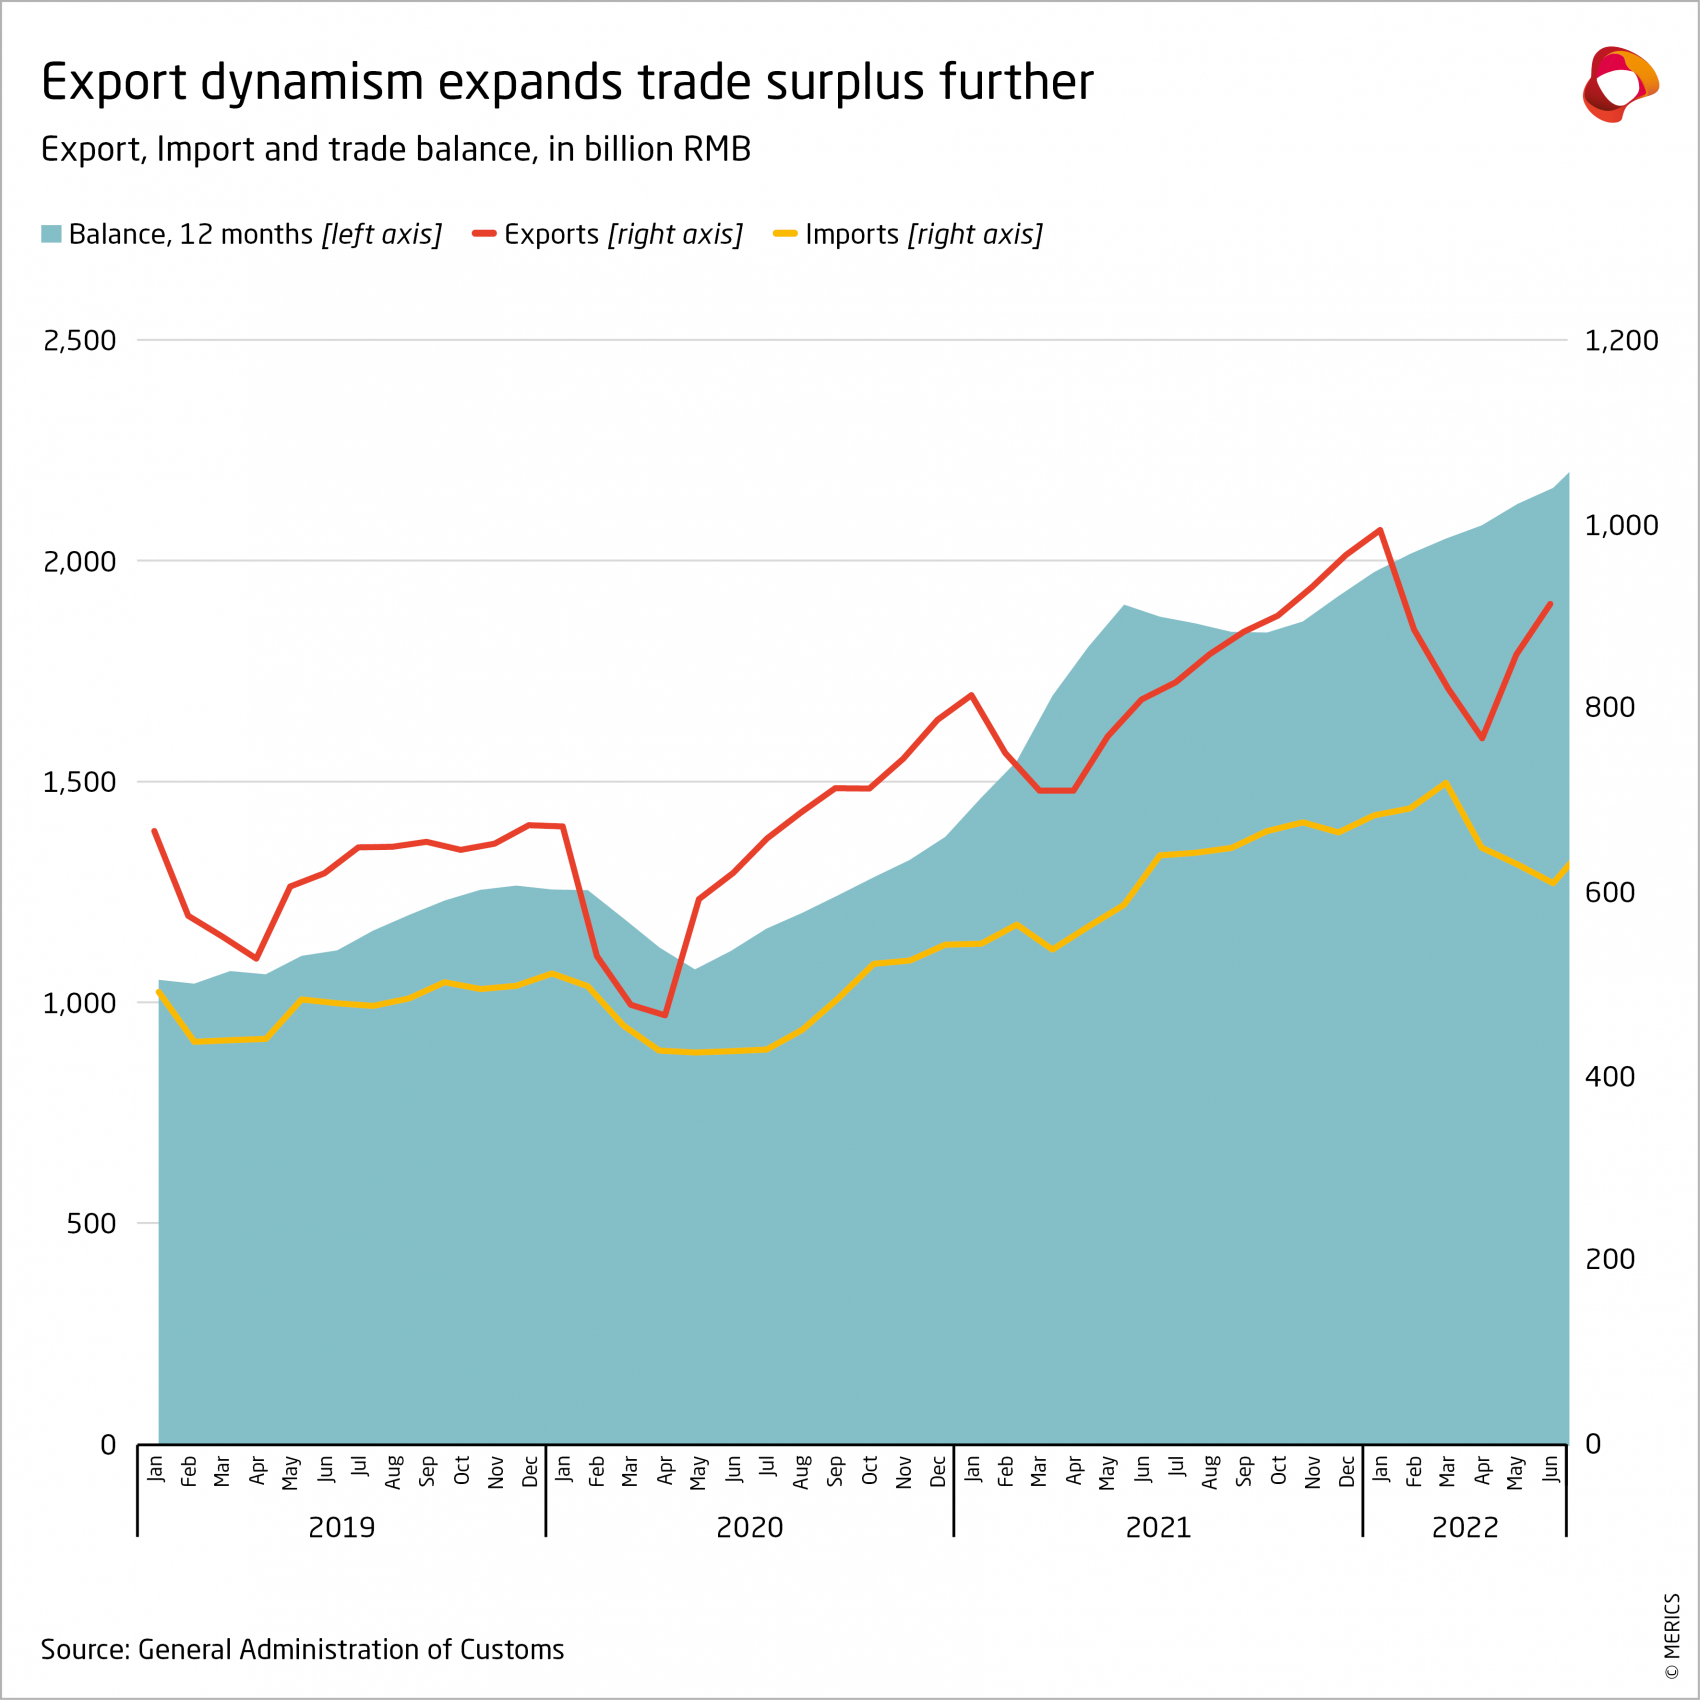 Export dynamism expands trade surplus further